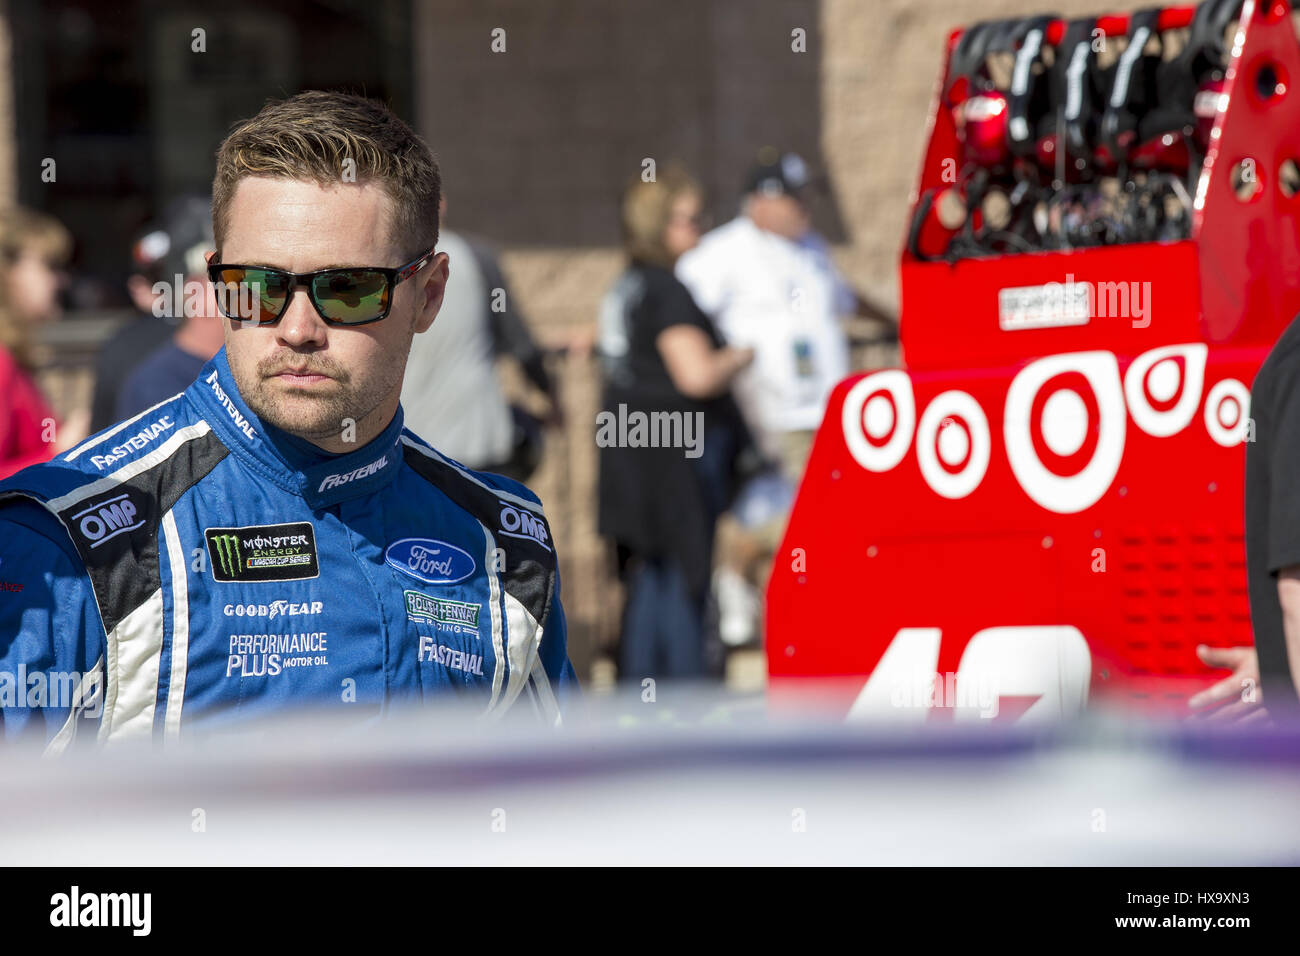 Fontana, California, USA. 24th Mar, 2017. March 24, 2017 - Fontana, California, USA: Ricky Stenhouse Jr. (17) hangs out on pit road prior to qualifying for the Auto Club 400 at Auto Club Speedway in Fontana, California. Credit: Jusitn R. Noe Asp Inc/ASP/ZUMA Wire/Alamy Live News Stock Photo